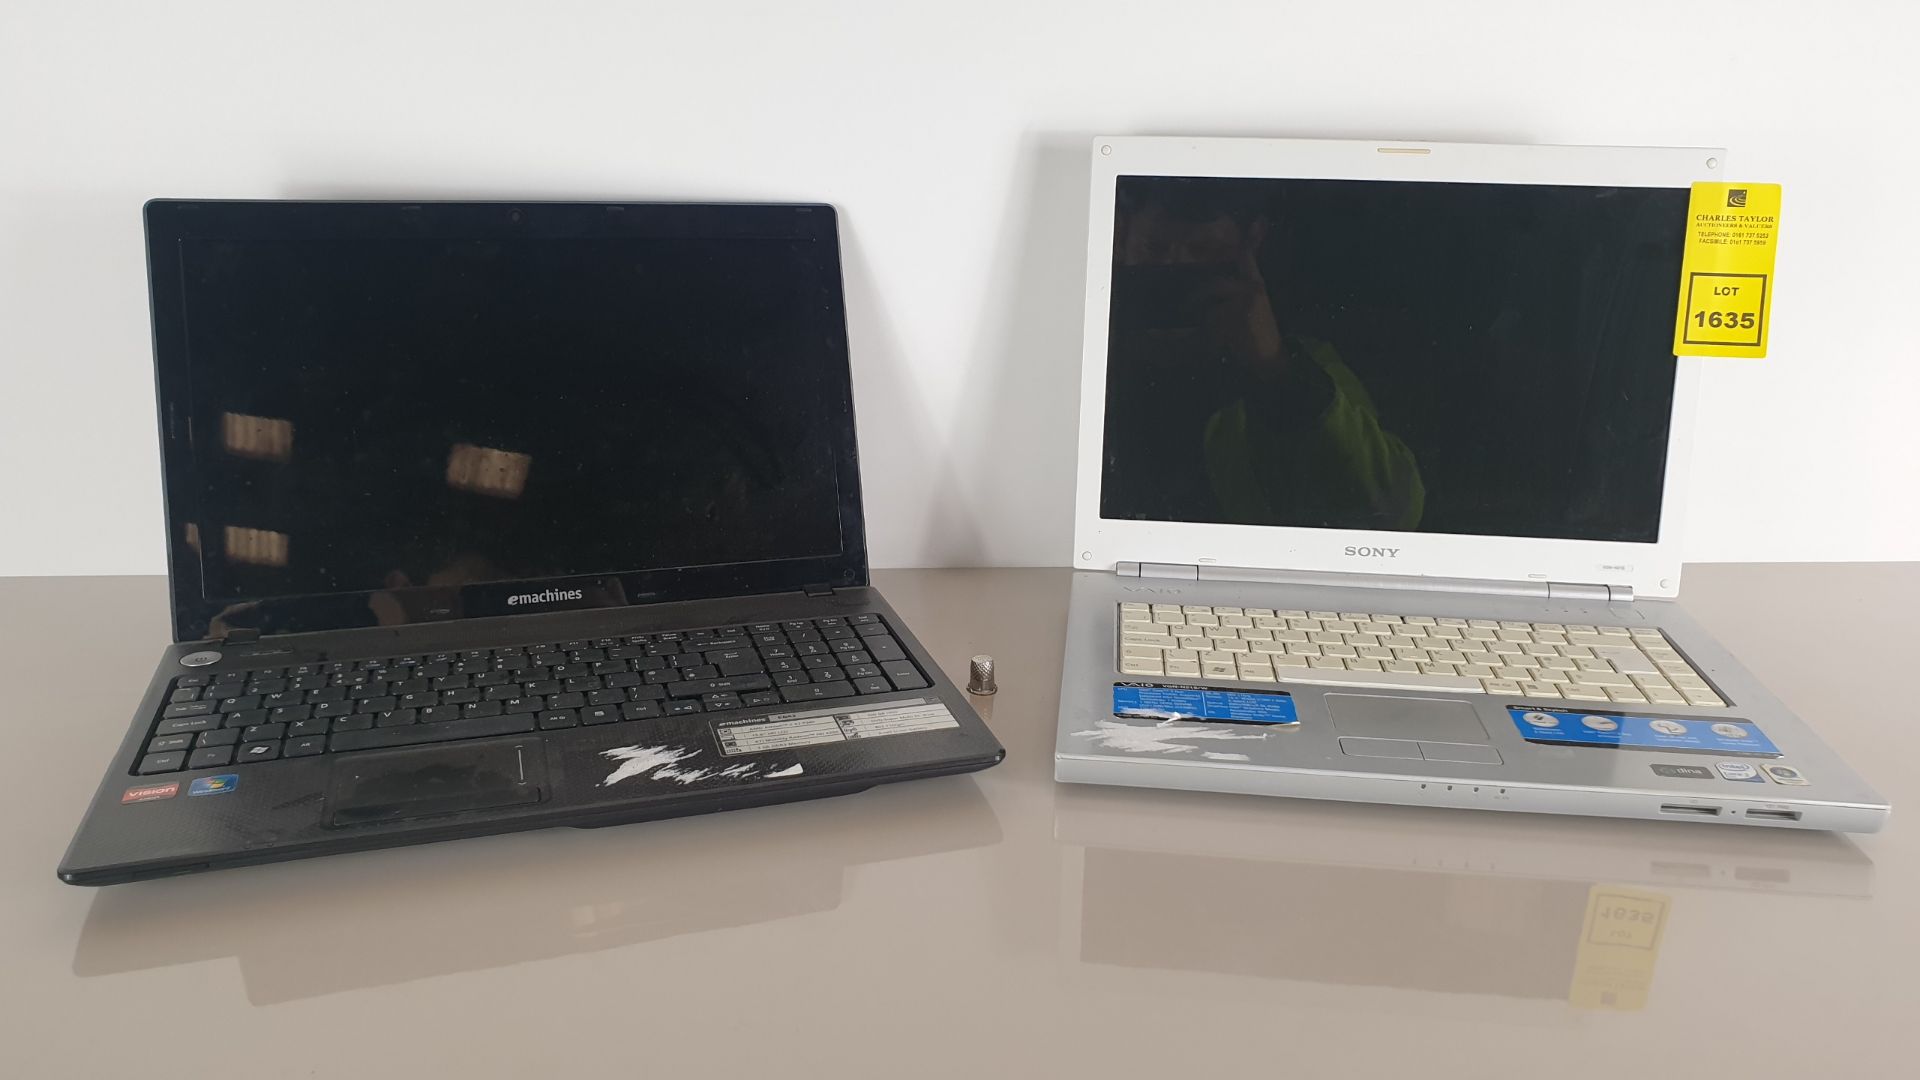 (LOT FOR THURSDAY 28TH MAY AUCTION) 2 X LAPTOPS WITH CHARGERS (NO OS SYSTEMS) - SONY VAIO VGN-N21S/W